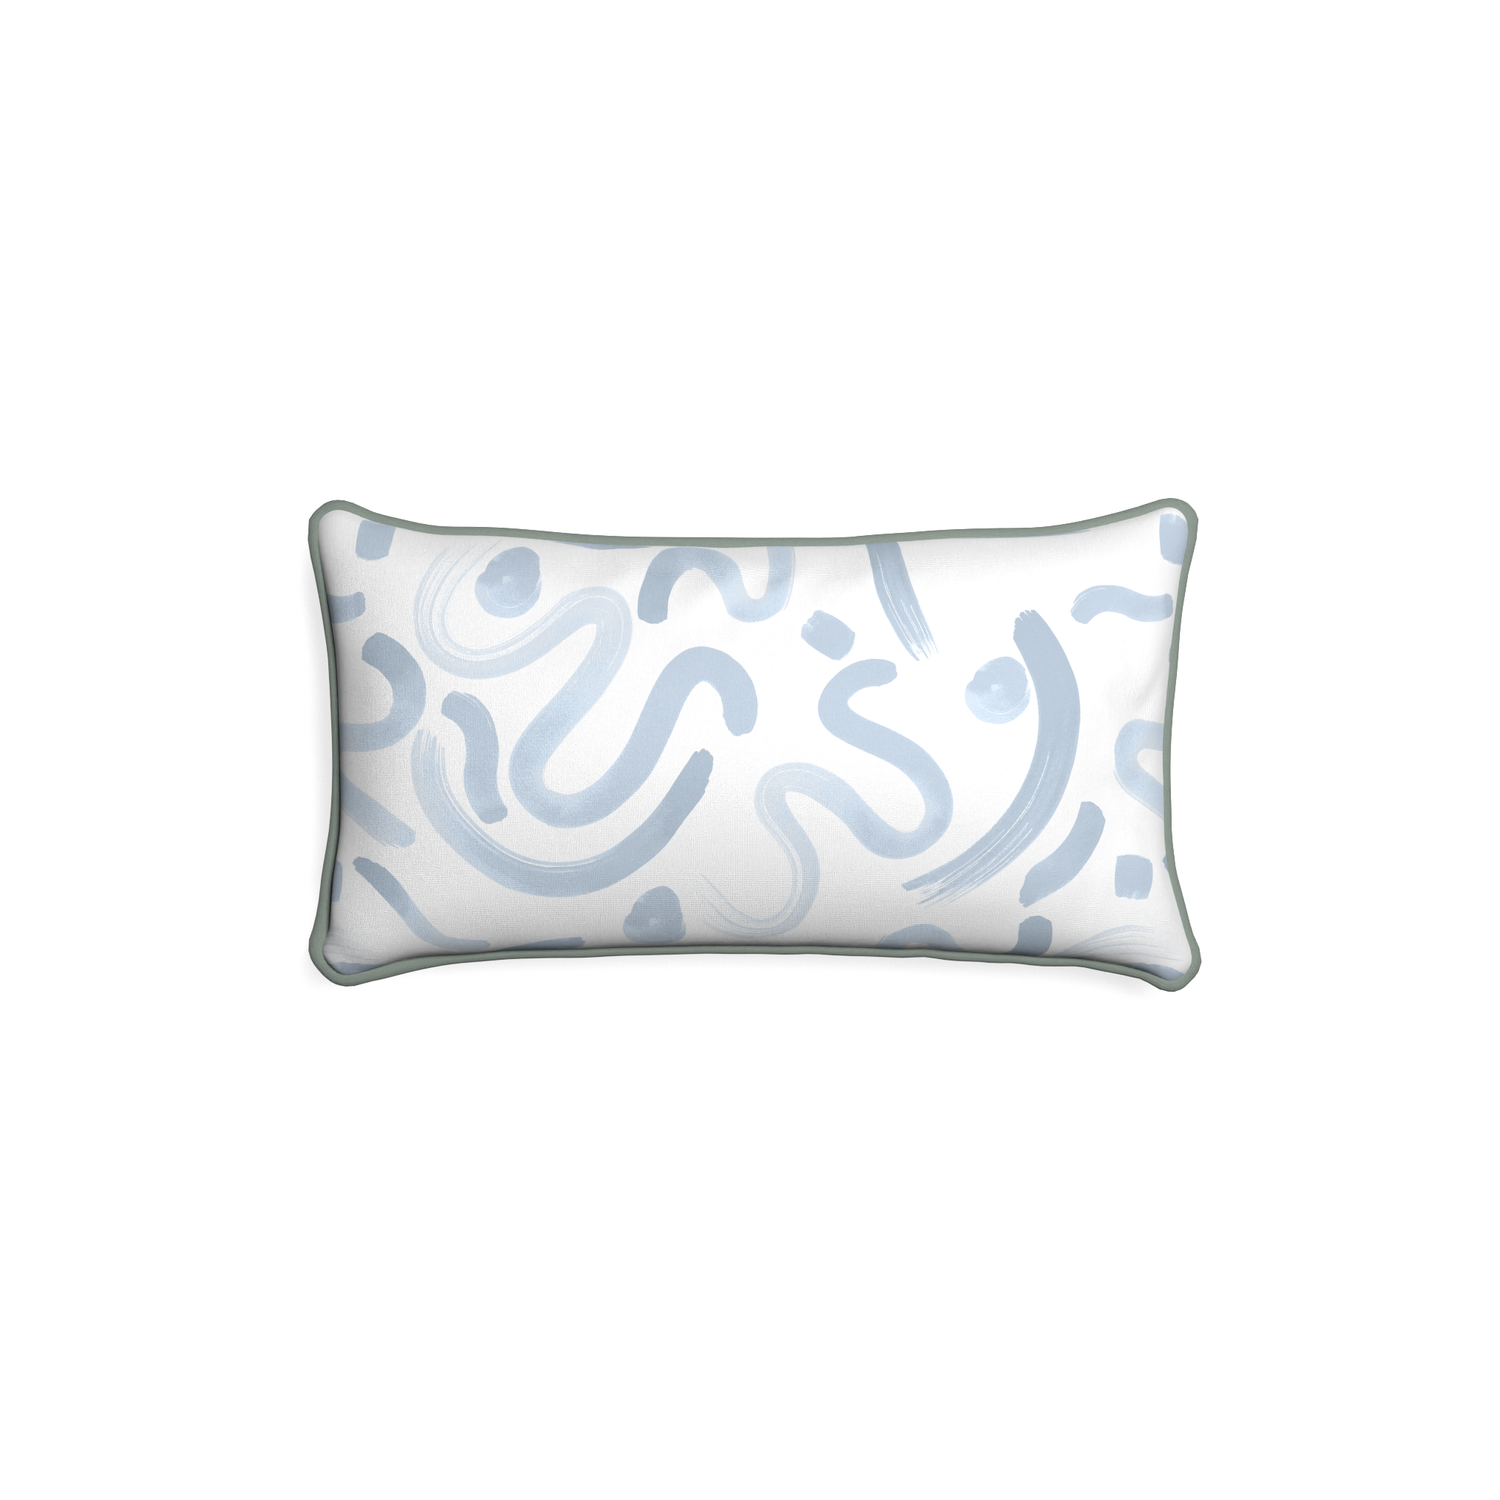 Petite-lumbar hockney sky custom abstract sky bluepillow with sage piping on white background